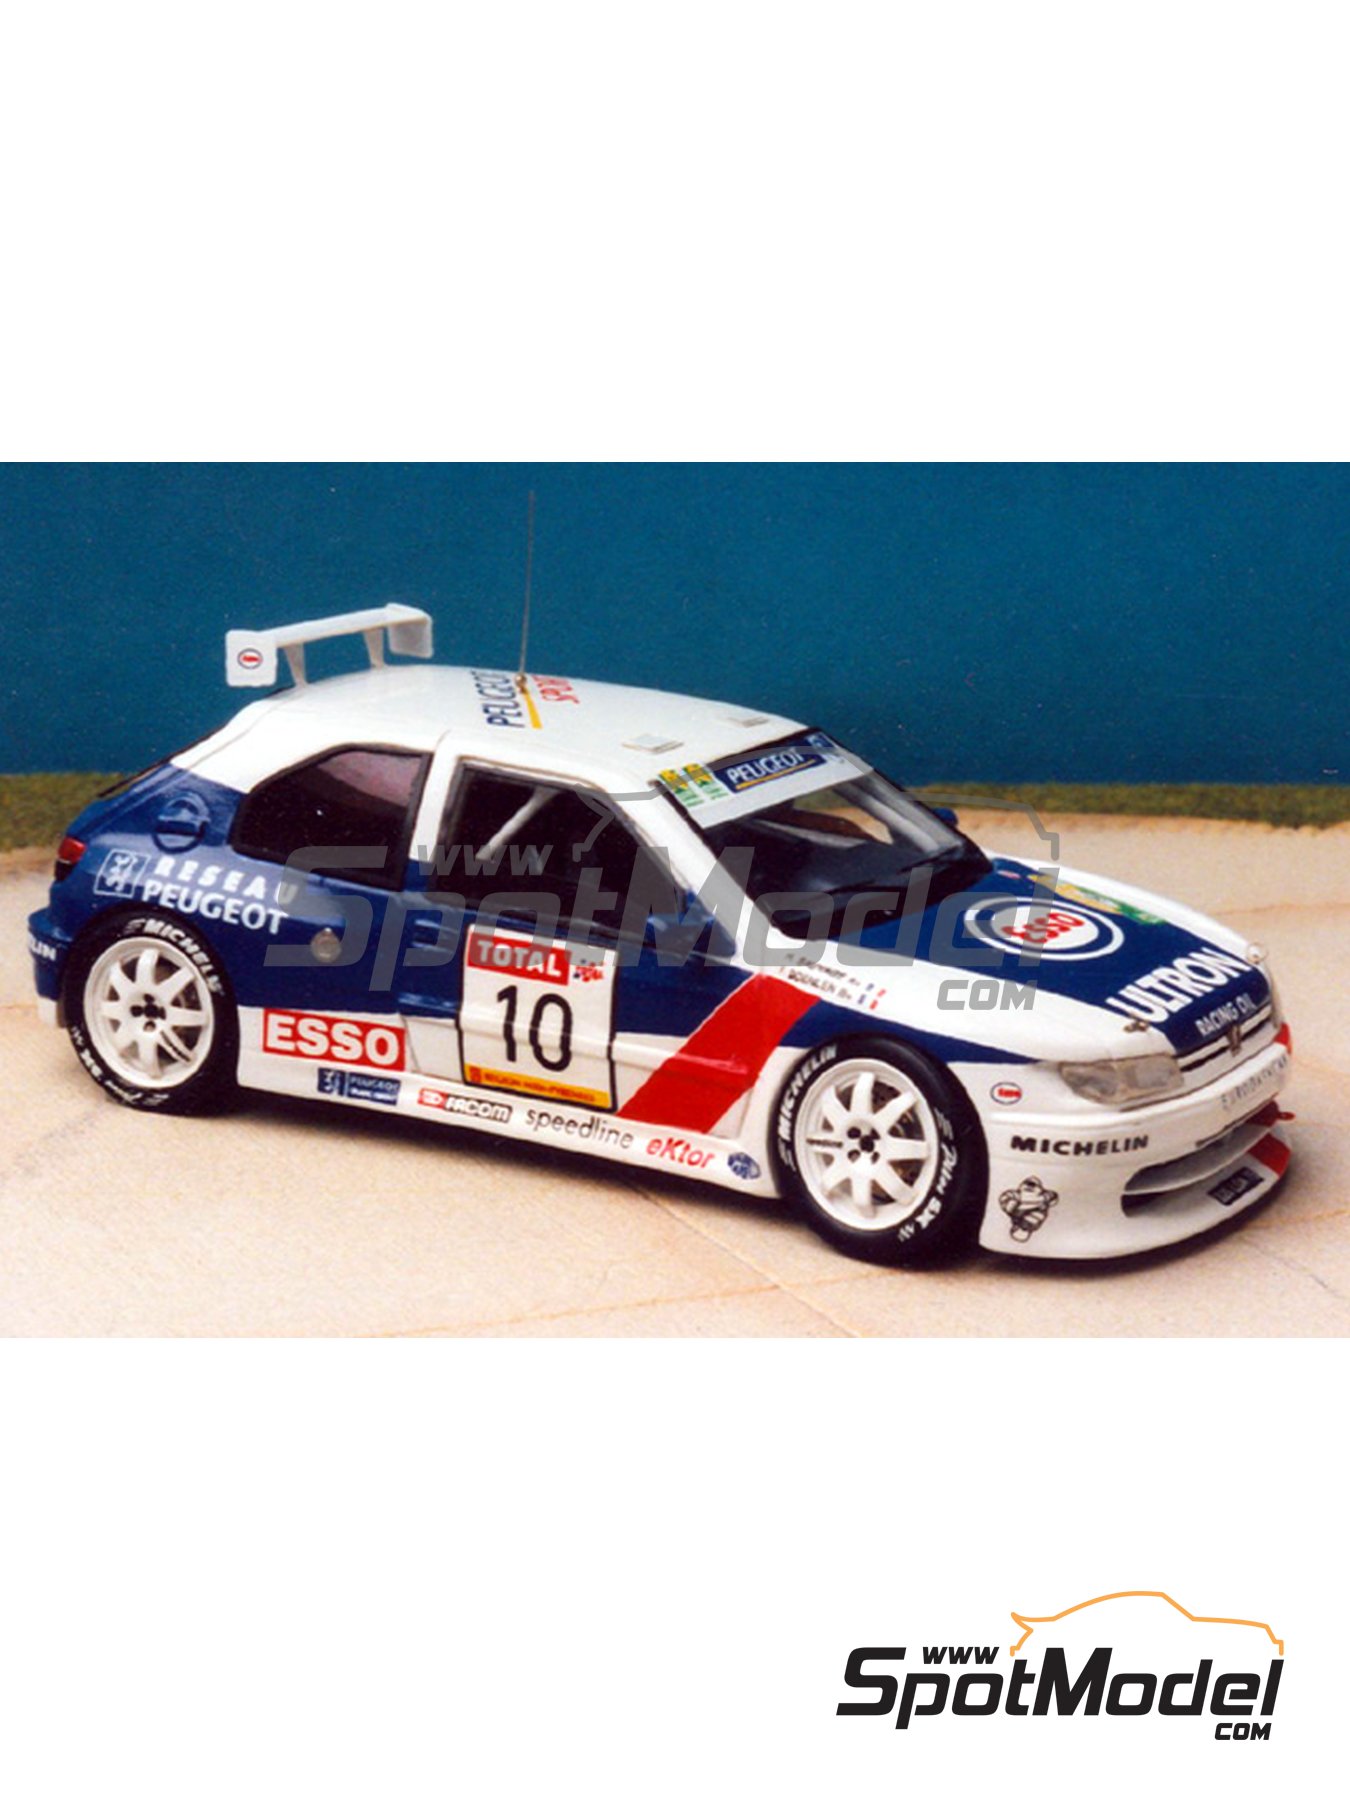 Peugeot 306 Maxi Kit Car sponsored by Esso Ultron - Rouergue Rally 1995.  Car scale model kit in 1/43 scale manufactured by Renaissance Models (ref.  01